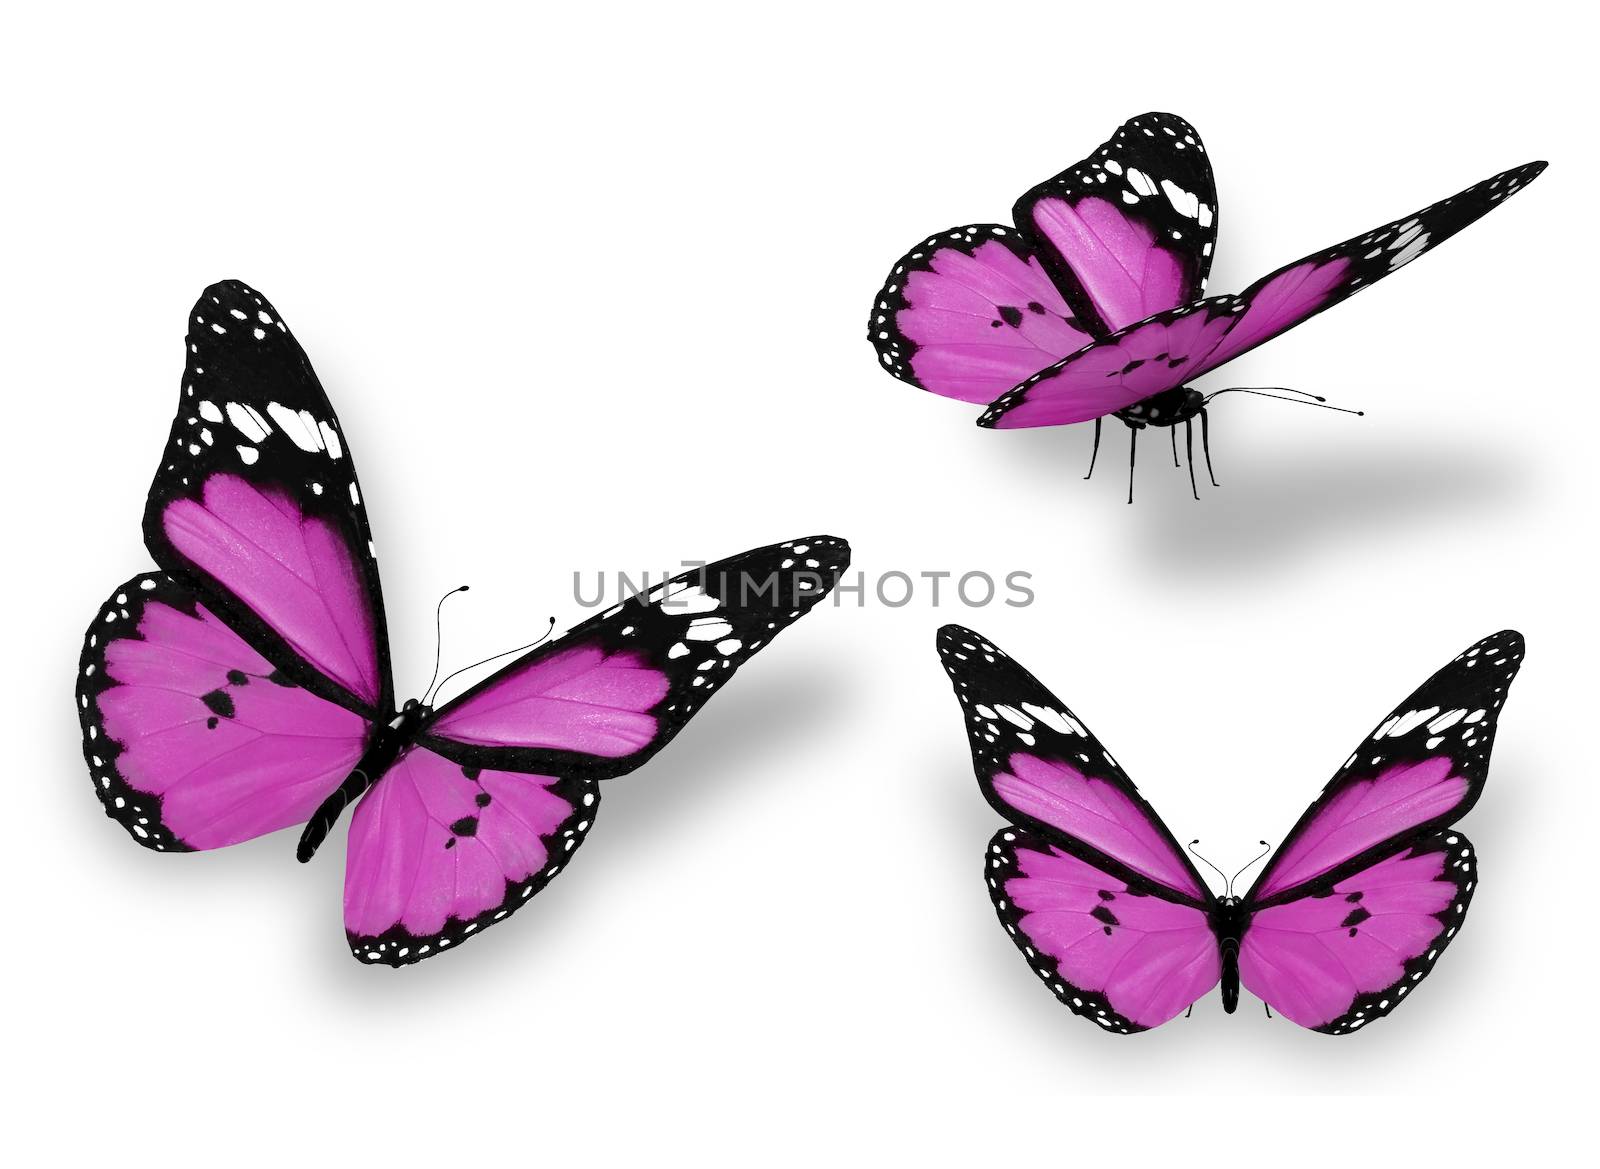 Three violet butterflies, isolated on white